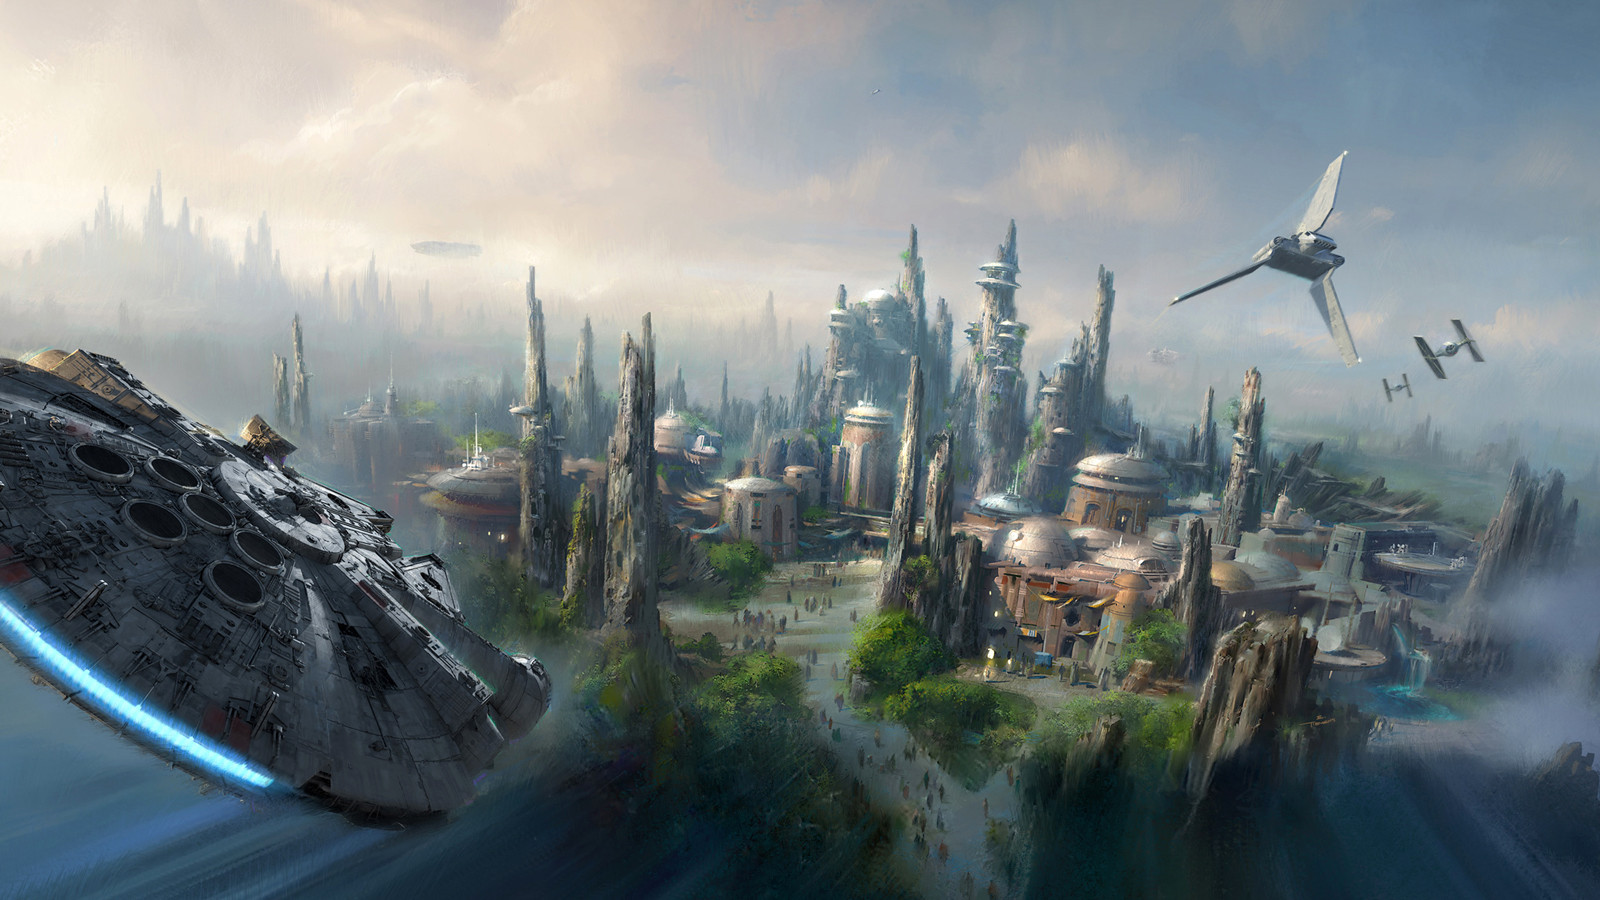 DisneyLand (DIS) Releases Glimpse Of Star Wars Themed Land